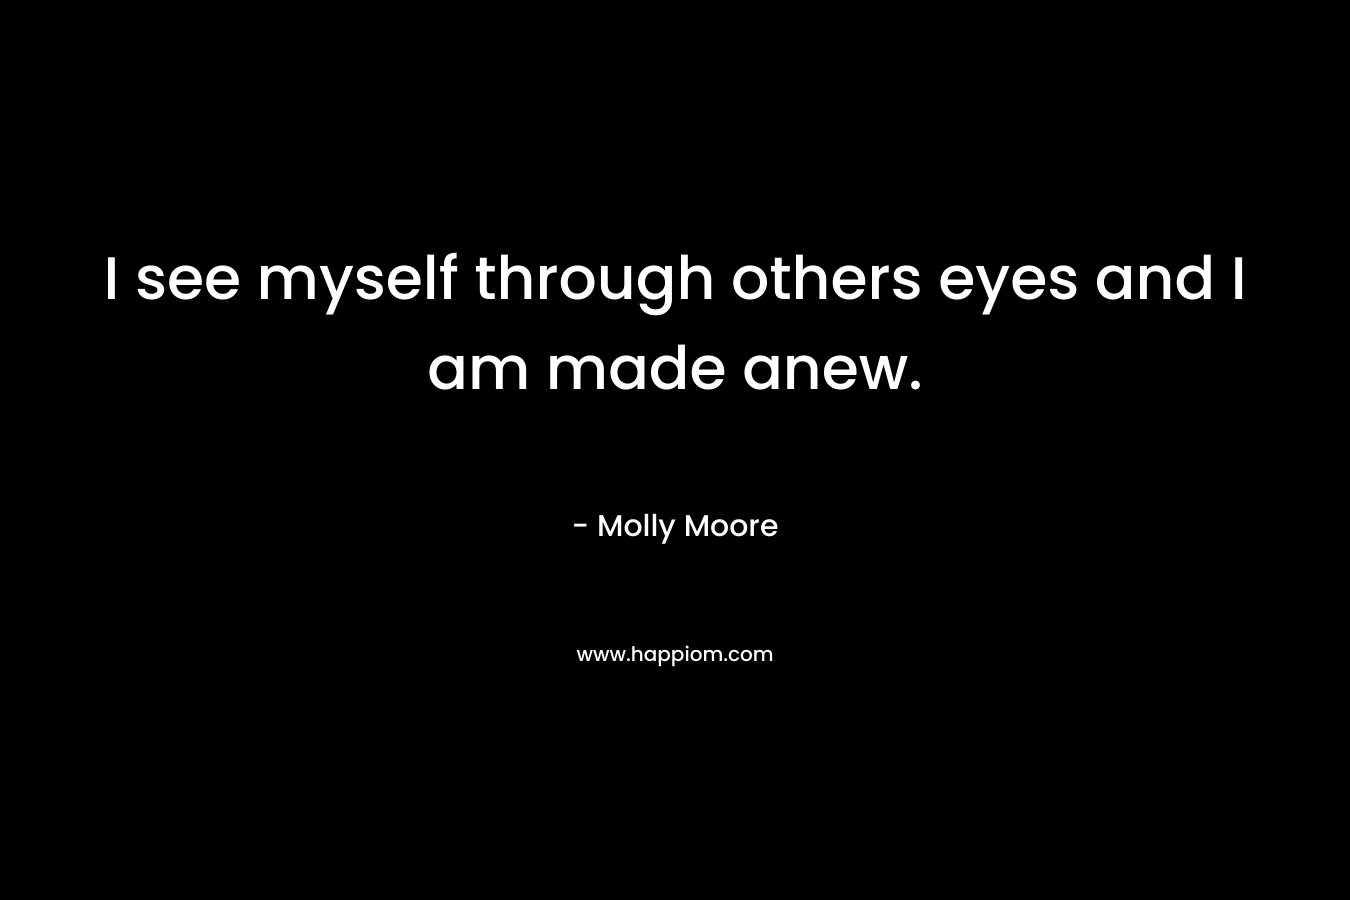 I see myself through others eyes and I am made anew.